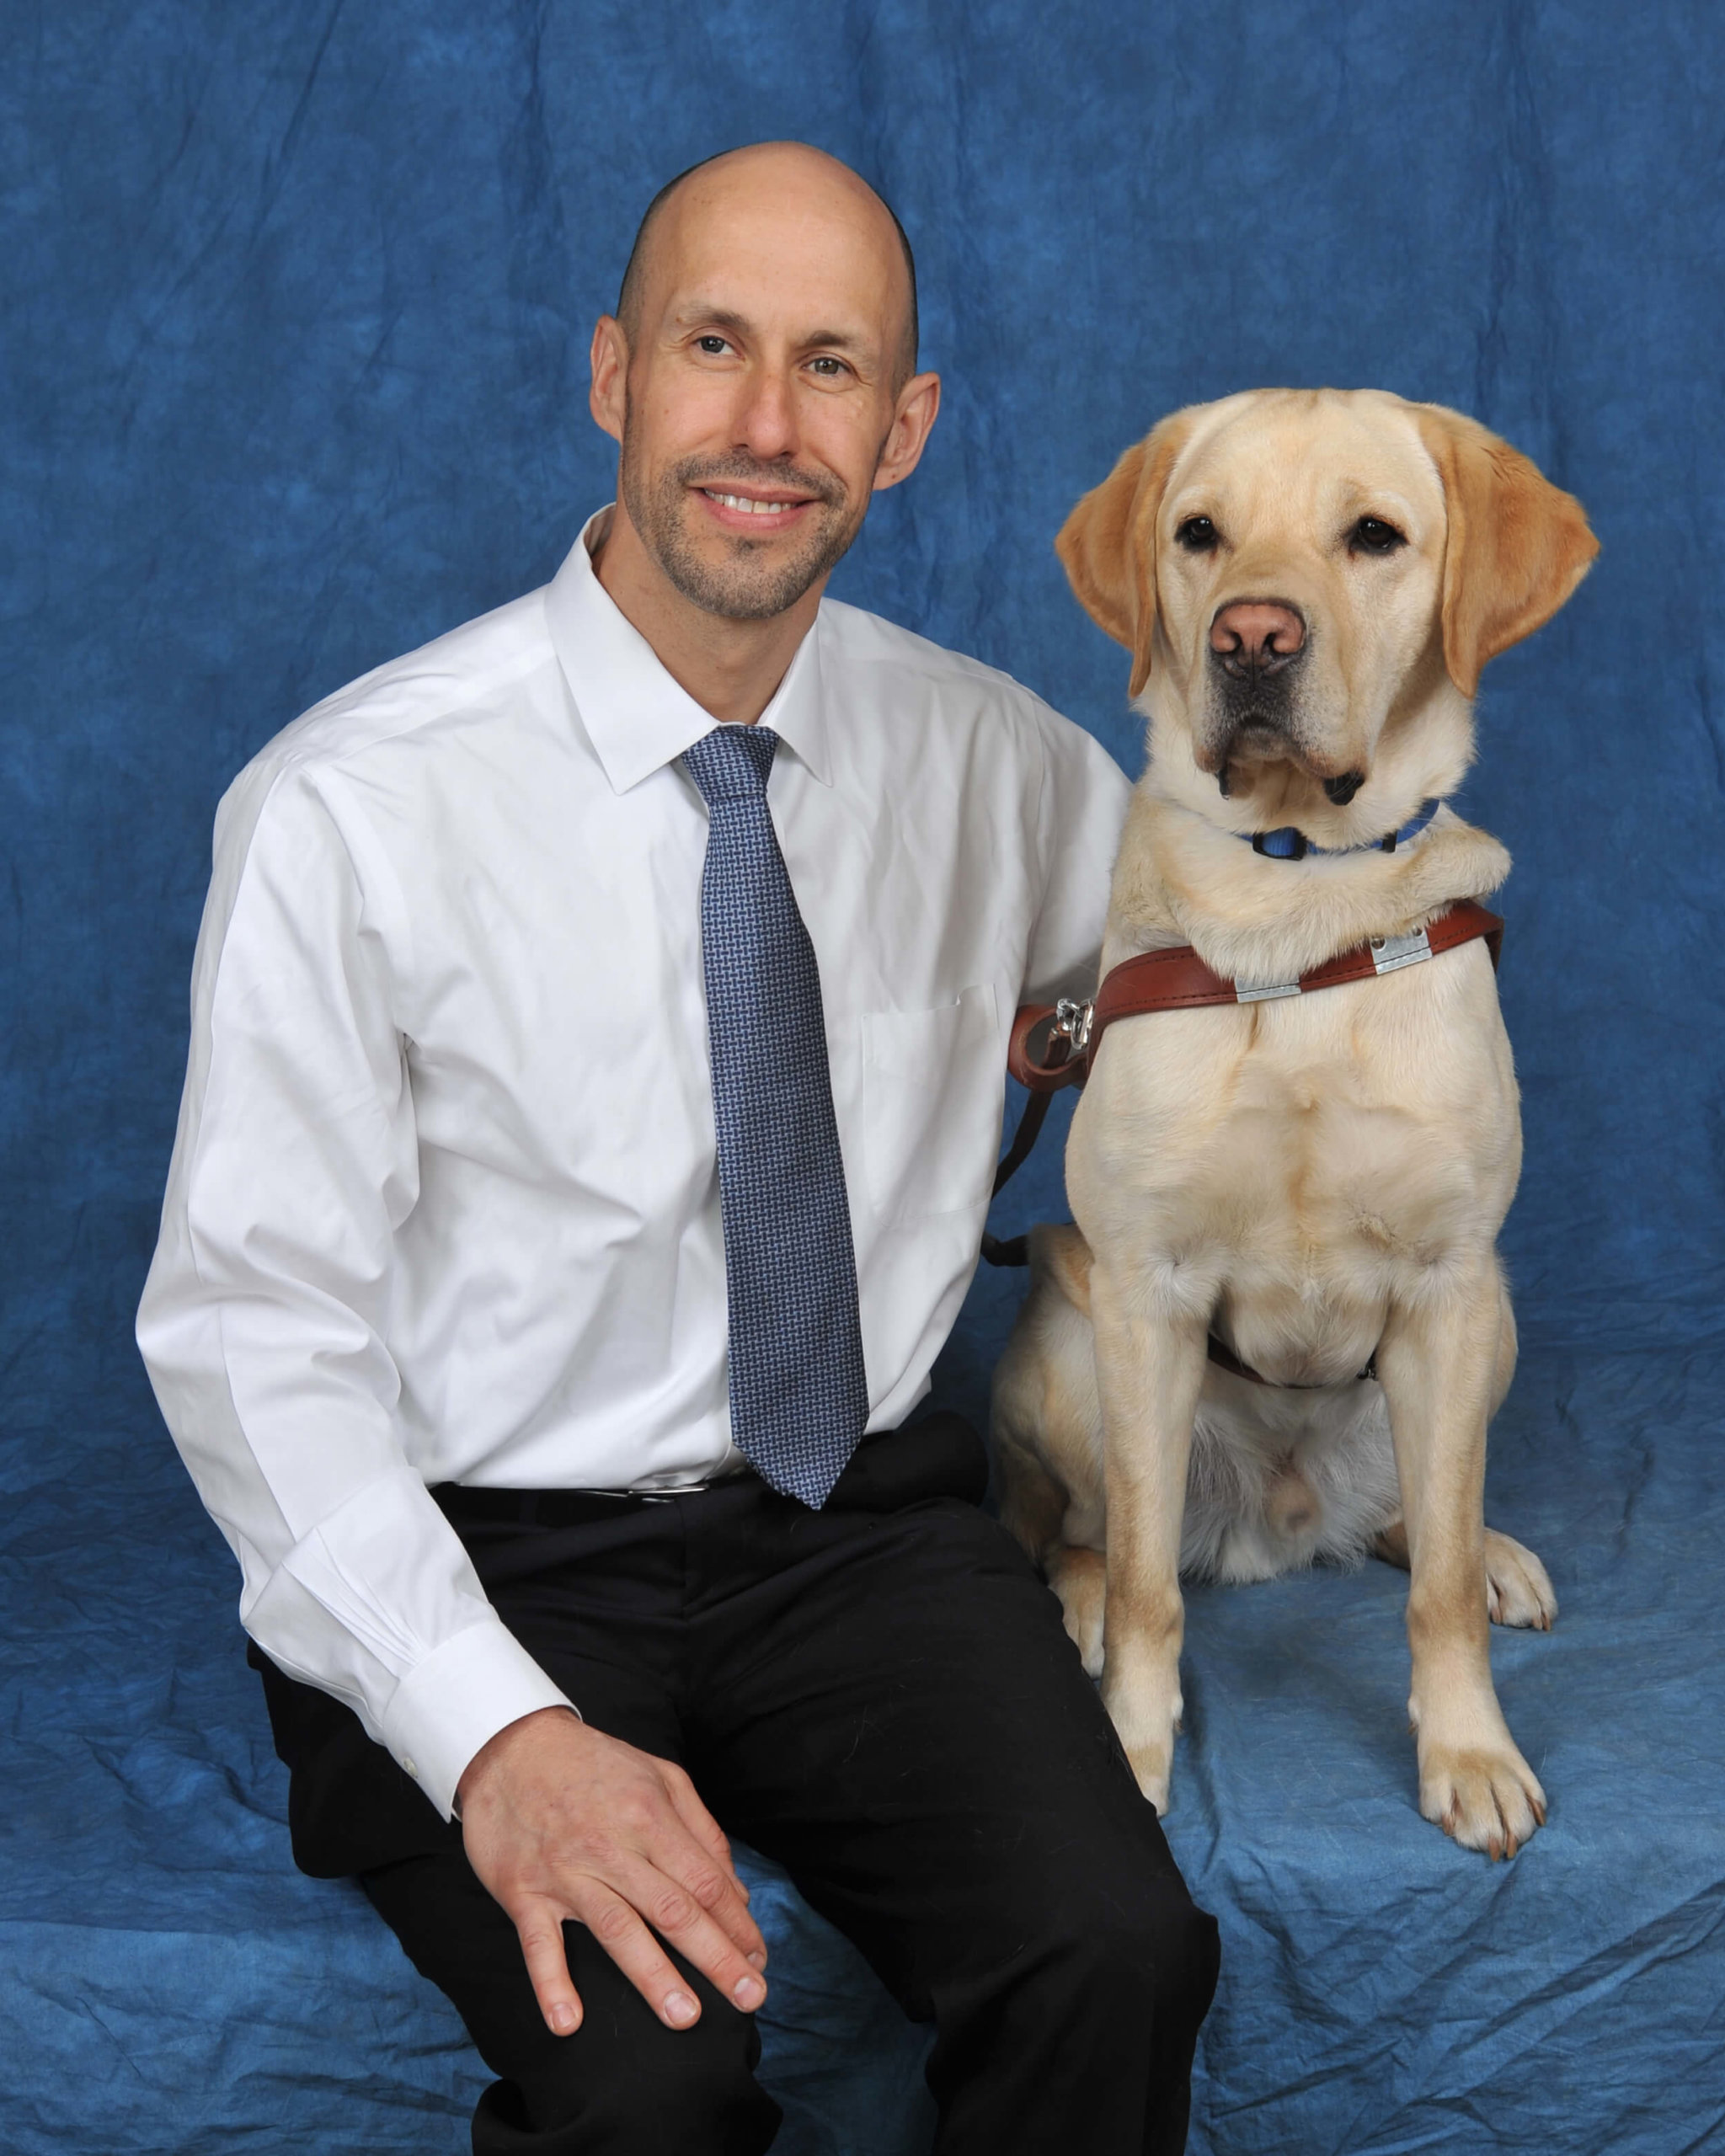 Guiding Eyes CEO Tom Panek with yellow Lab guide dog, Gus